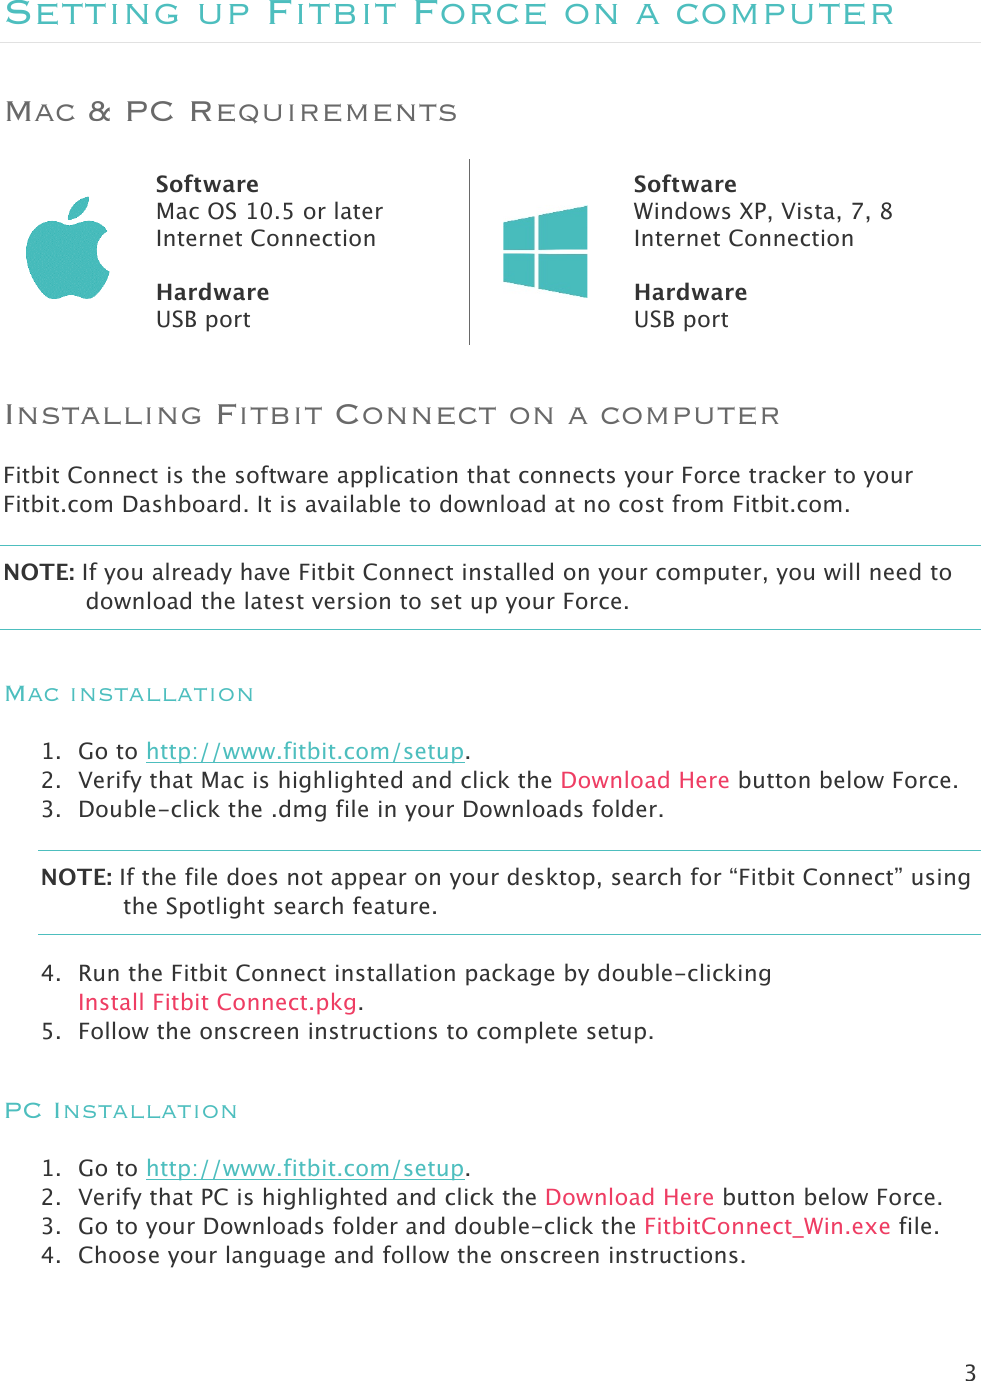 3  Setting up Fitbit Force on a computer Mac &amp; PC Requirements  Software Mac OS 10.5 or later Internet Connection  Hardware USB port  Software Windows XP, Vista, 7, 8 Internet Connection  Hardware USB port Installing Fitbit Connect on a computer Fitbit Connect is the software application that connects your Force tracker to your Fitbit.com Dashboard. It is available to download at no cost from Fitbit.com.  NOTE: If you already have Fitbit Connect installed on your computer, you will need to download the latest version to set up your Force.  Mac installation 1. Go to http://www.fitbit.com/setup. 2. Verify that Mac is highlighted and click the Download Here button below Force. 3. Double-click the .dmg file in your Downloads folder. NOTE: If the file does not appear on your desktop, search for “Fitbit Connect” using the Spotlight search feature.  4. Run the Fitbit Connect installation package by double-clicking  Install Fitbit Connect.pkg. 5. Follow the onscreen instructions to complete setup.  PC Installation 1. Go to http://www.fitbit.com/setup. 2. Verify that PC is highlighted and click the Download Here button below Force. 3. Go to your Downloads folder and double-click the FitbitConnect_Win.exe file. 4. Choose your language and follow the onscreen instructions. 